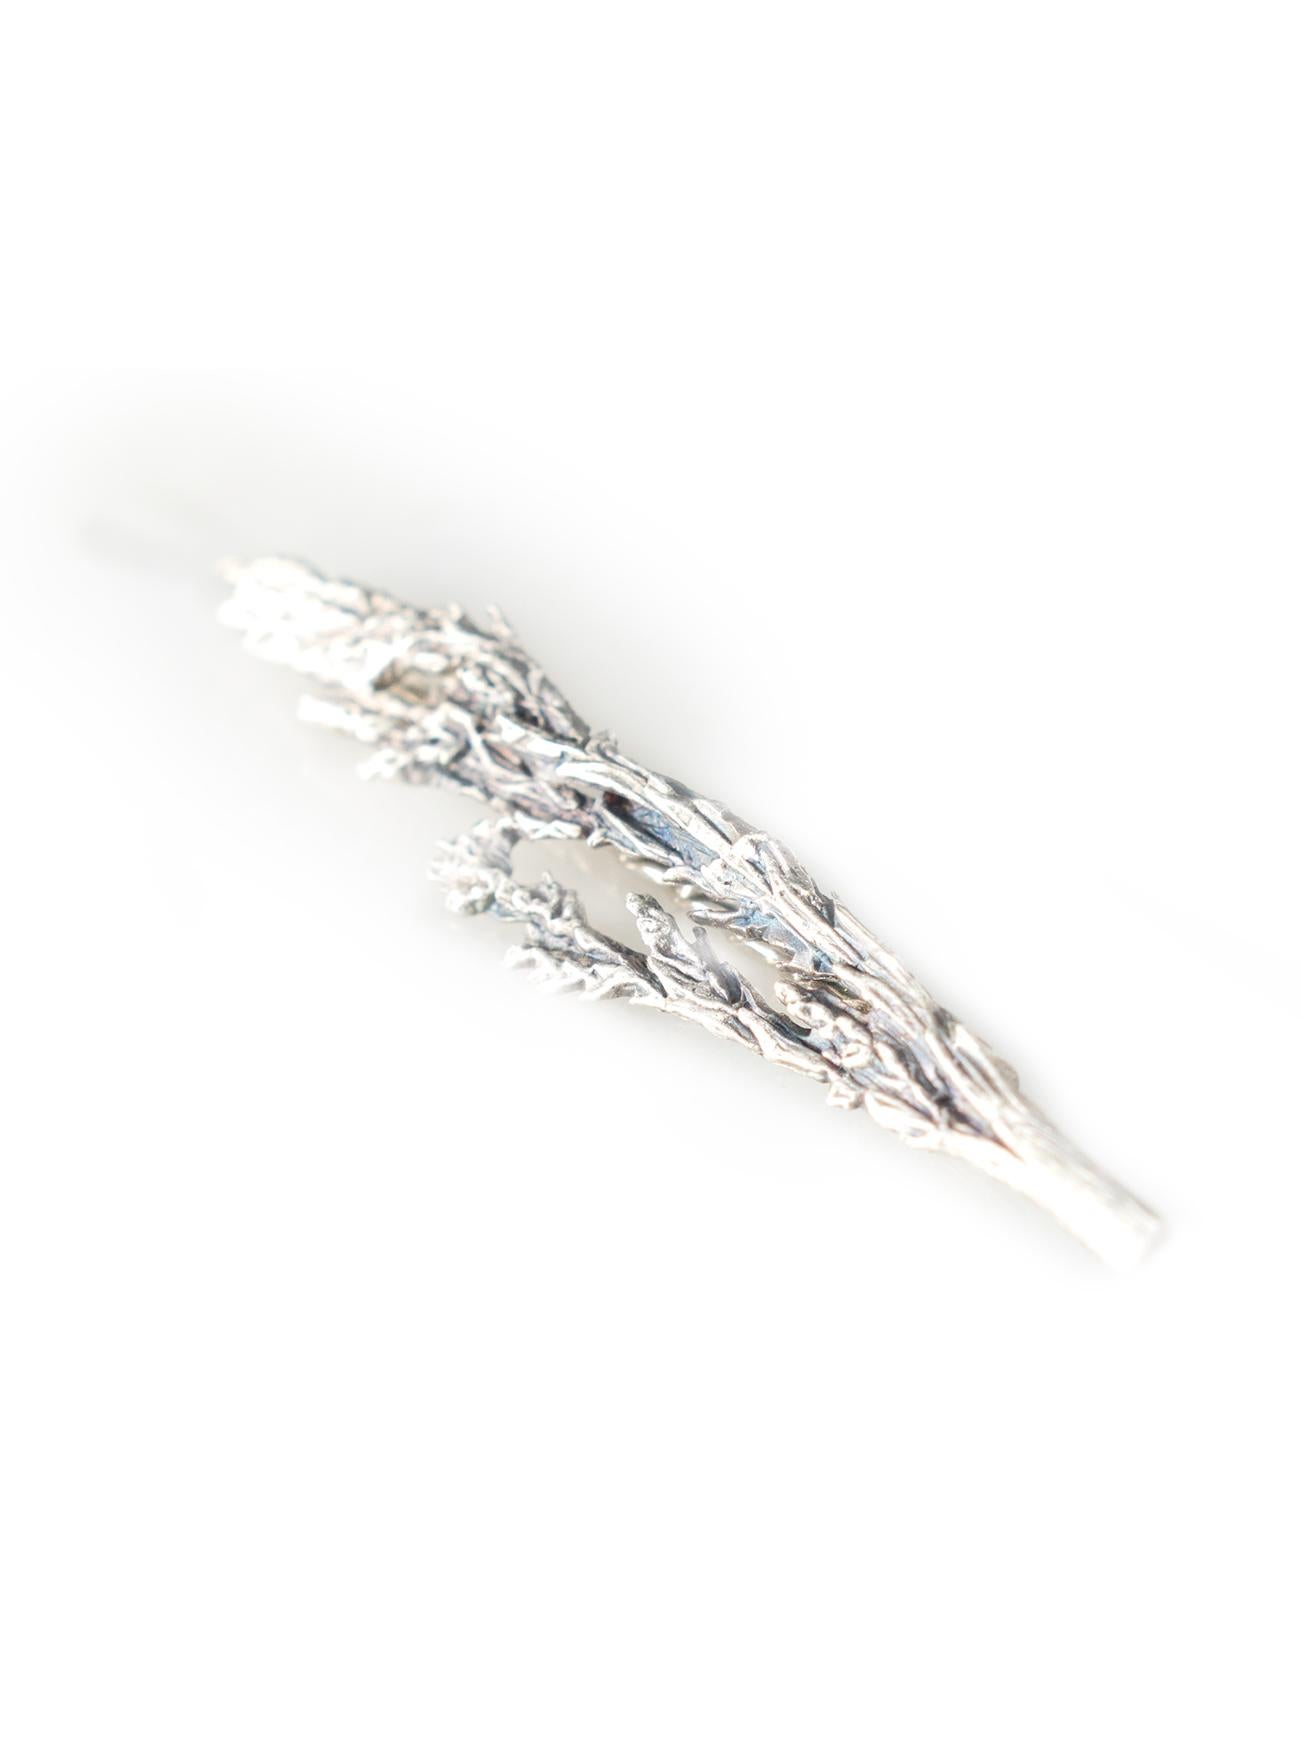 Featured in Vogue Sterling Silver Contemporary Juniper Brooch by the Artist 3